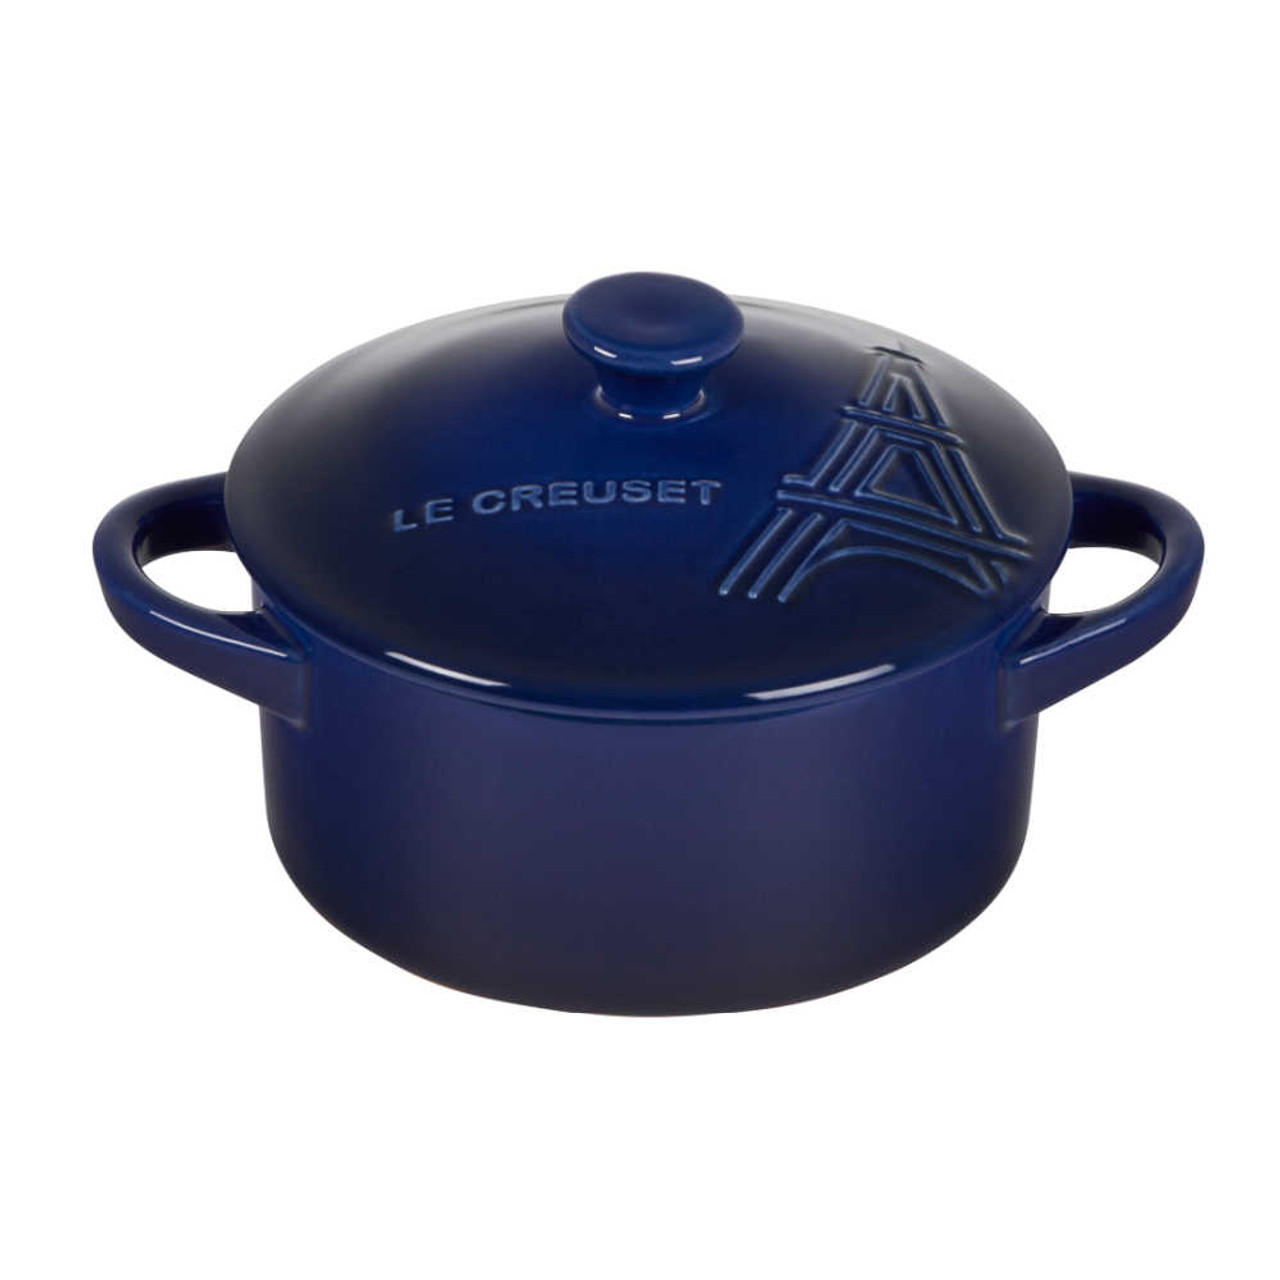 https://cdn11.bigcommerce.com/s-hccytny0od/images/stencil/1280x1280/products/4879/20314/Le_Creuset_Eiffel_Tower_Collection_Mini_Cocotte_in_Indigo_1__67235.1657236552.jpg?c=2?imbypass=on